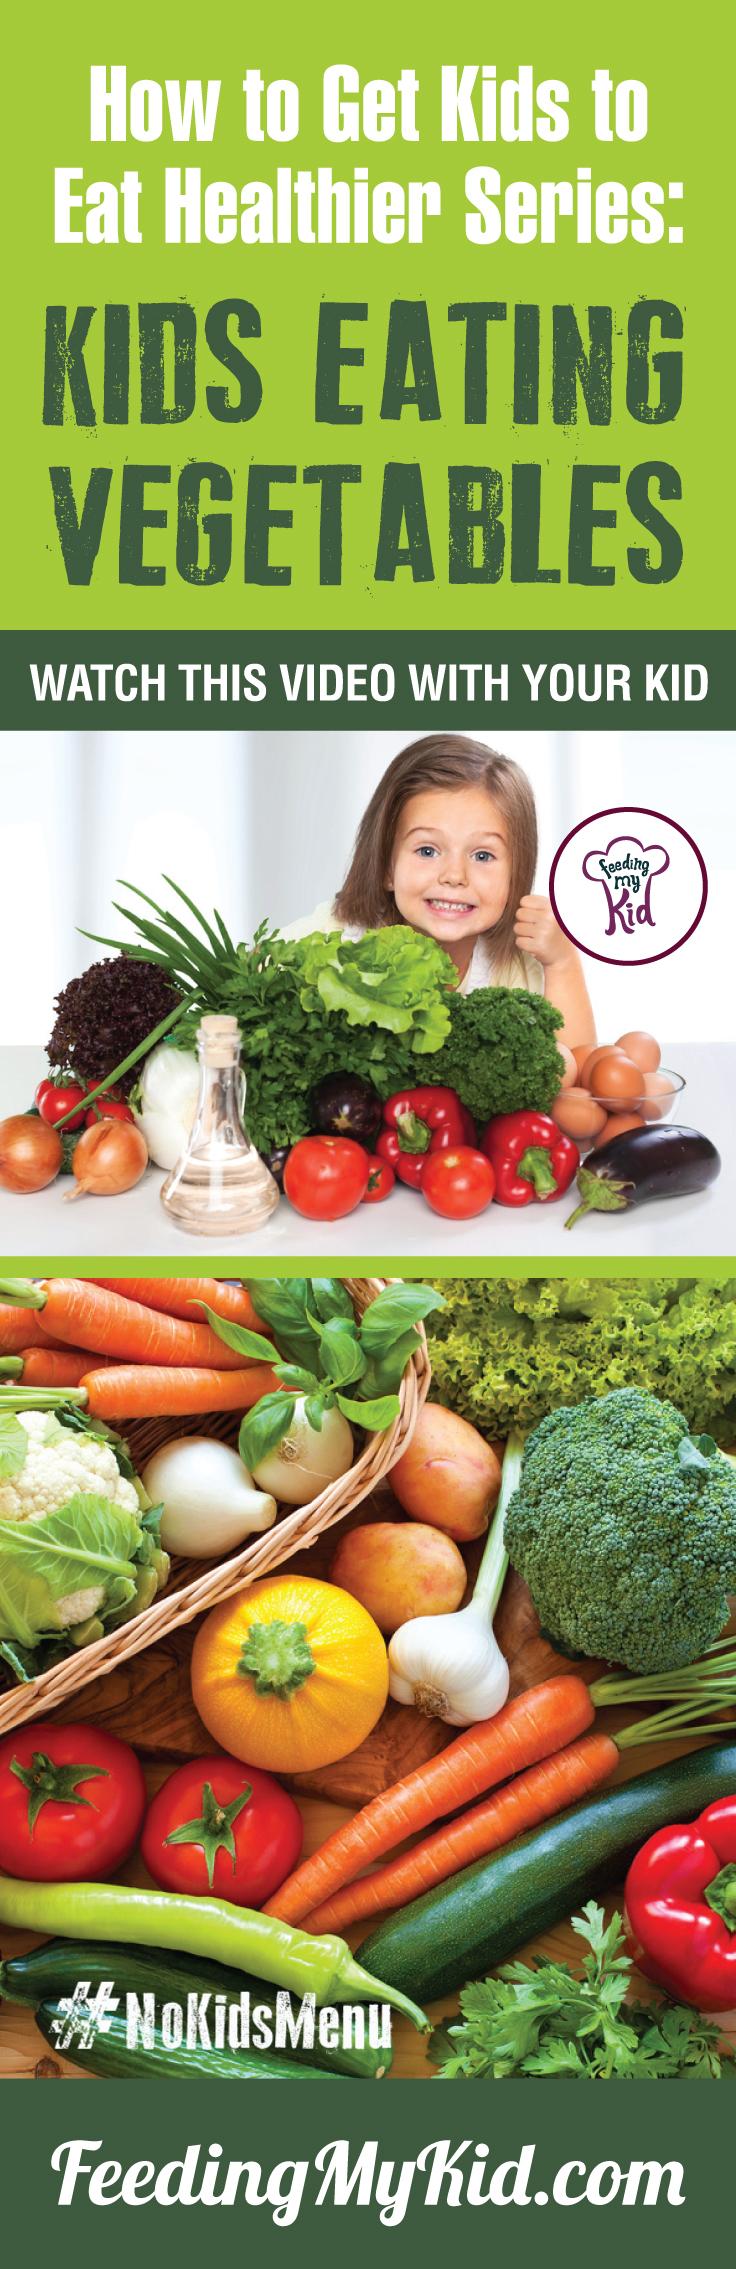 How to Get Kids to Eat Healthier Series: Kids Eating Vegetables